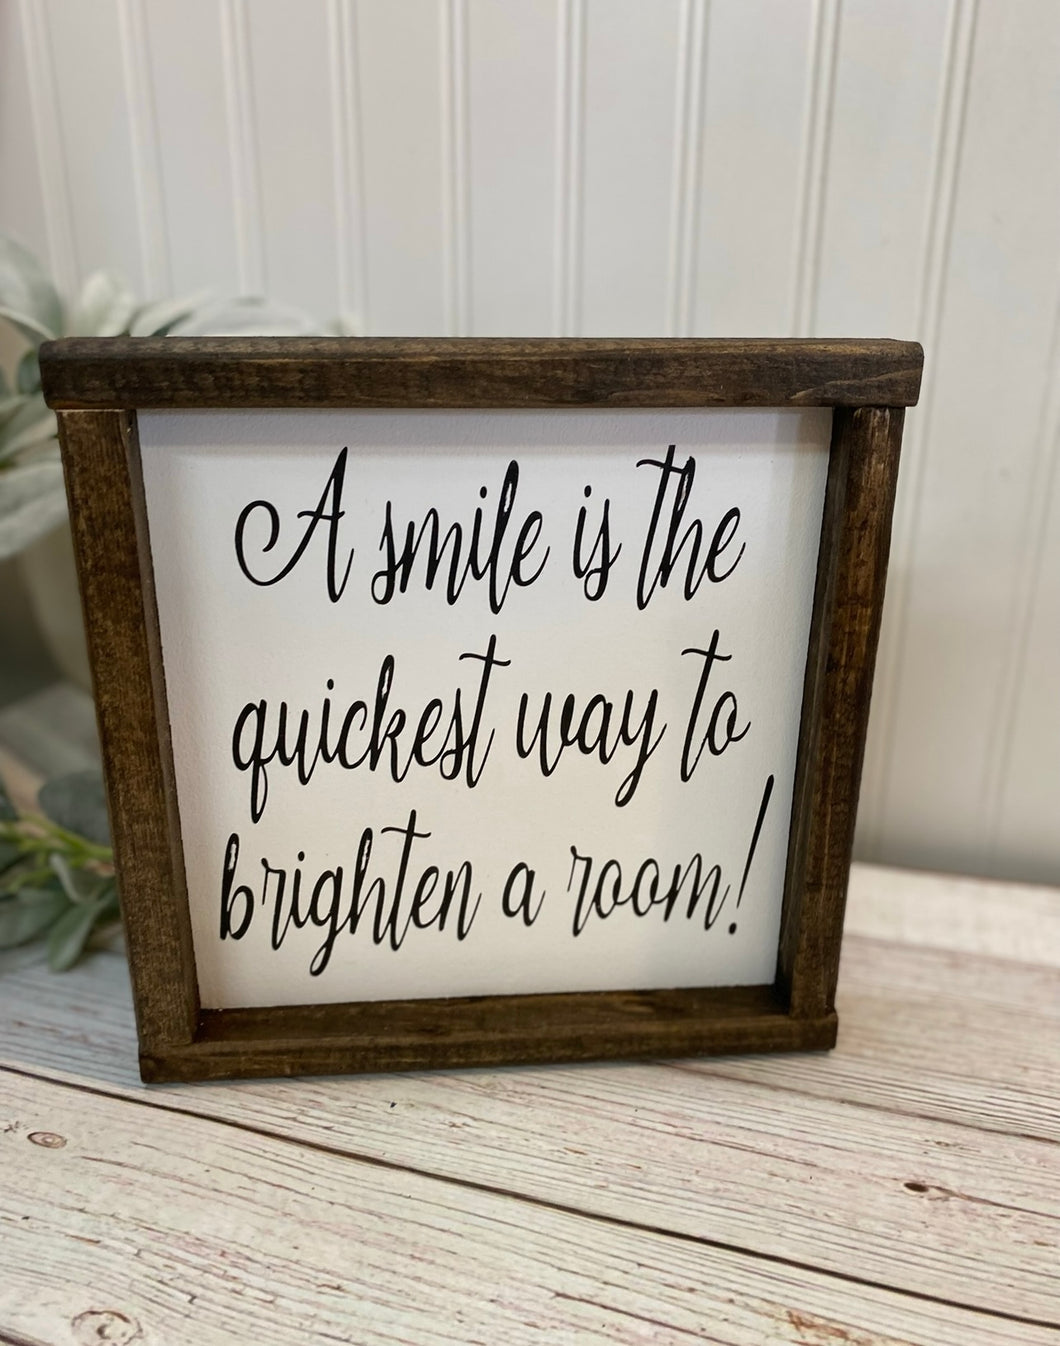 A smile is the quickest way to brighten a room!